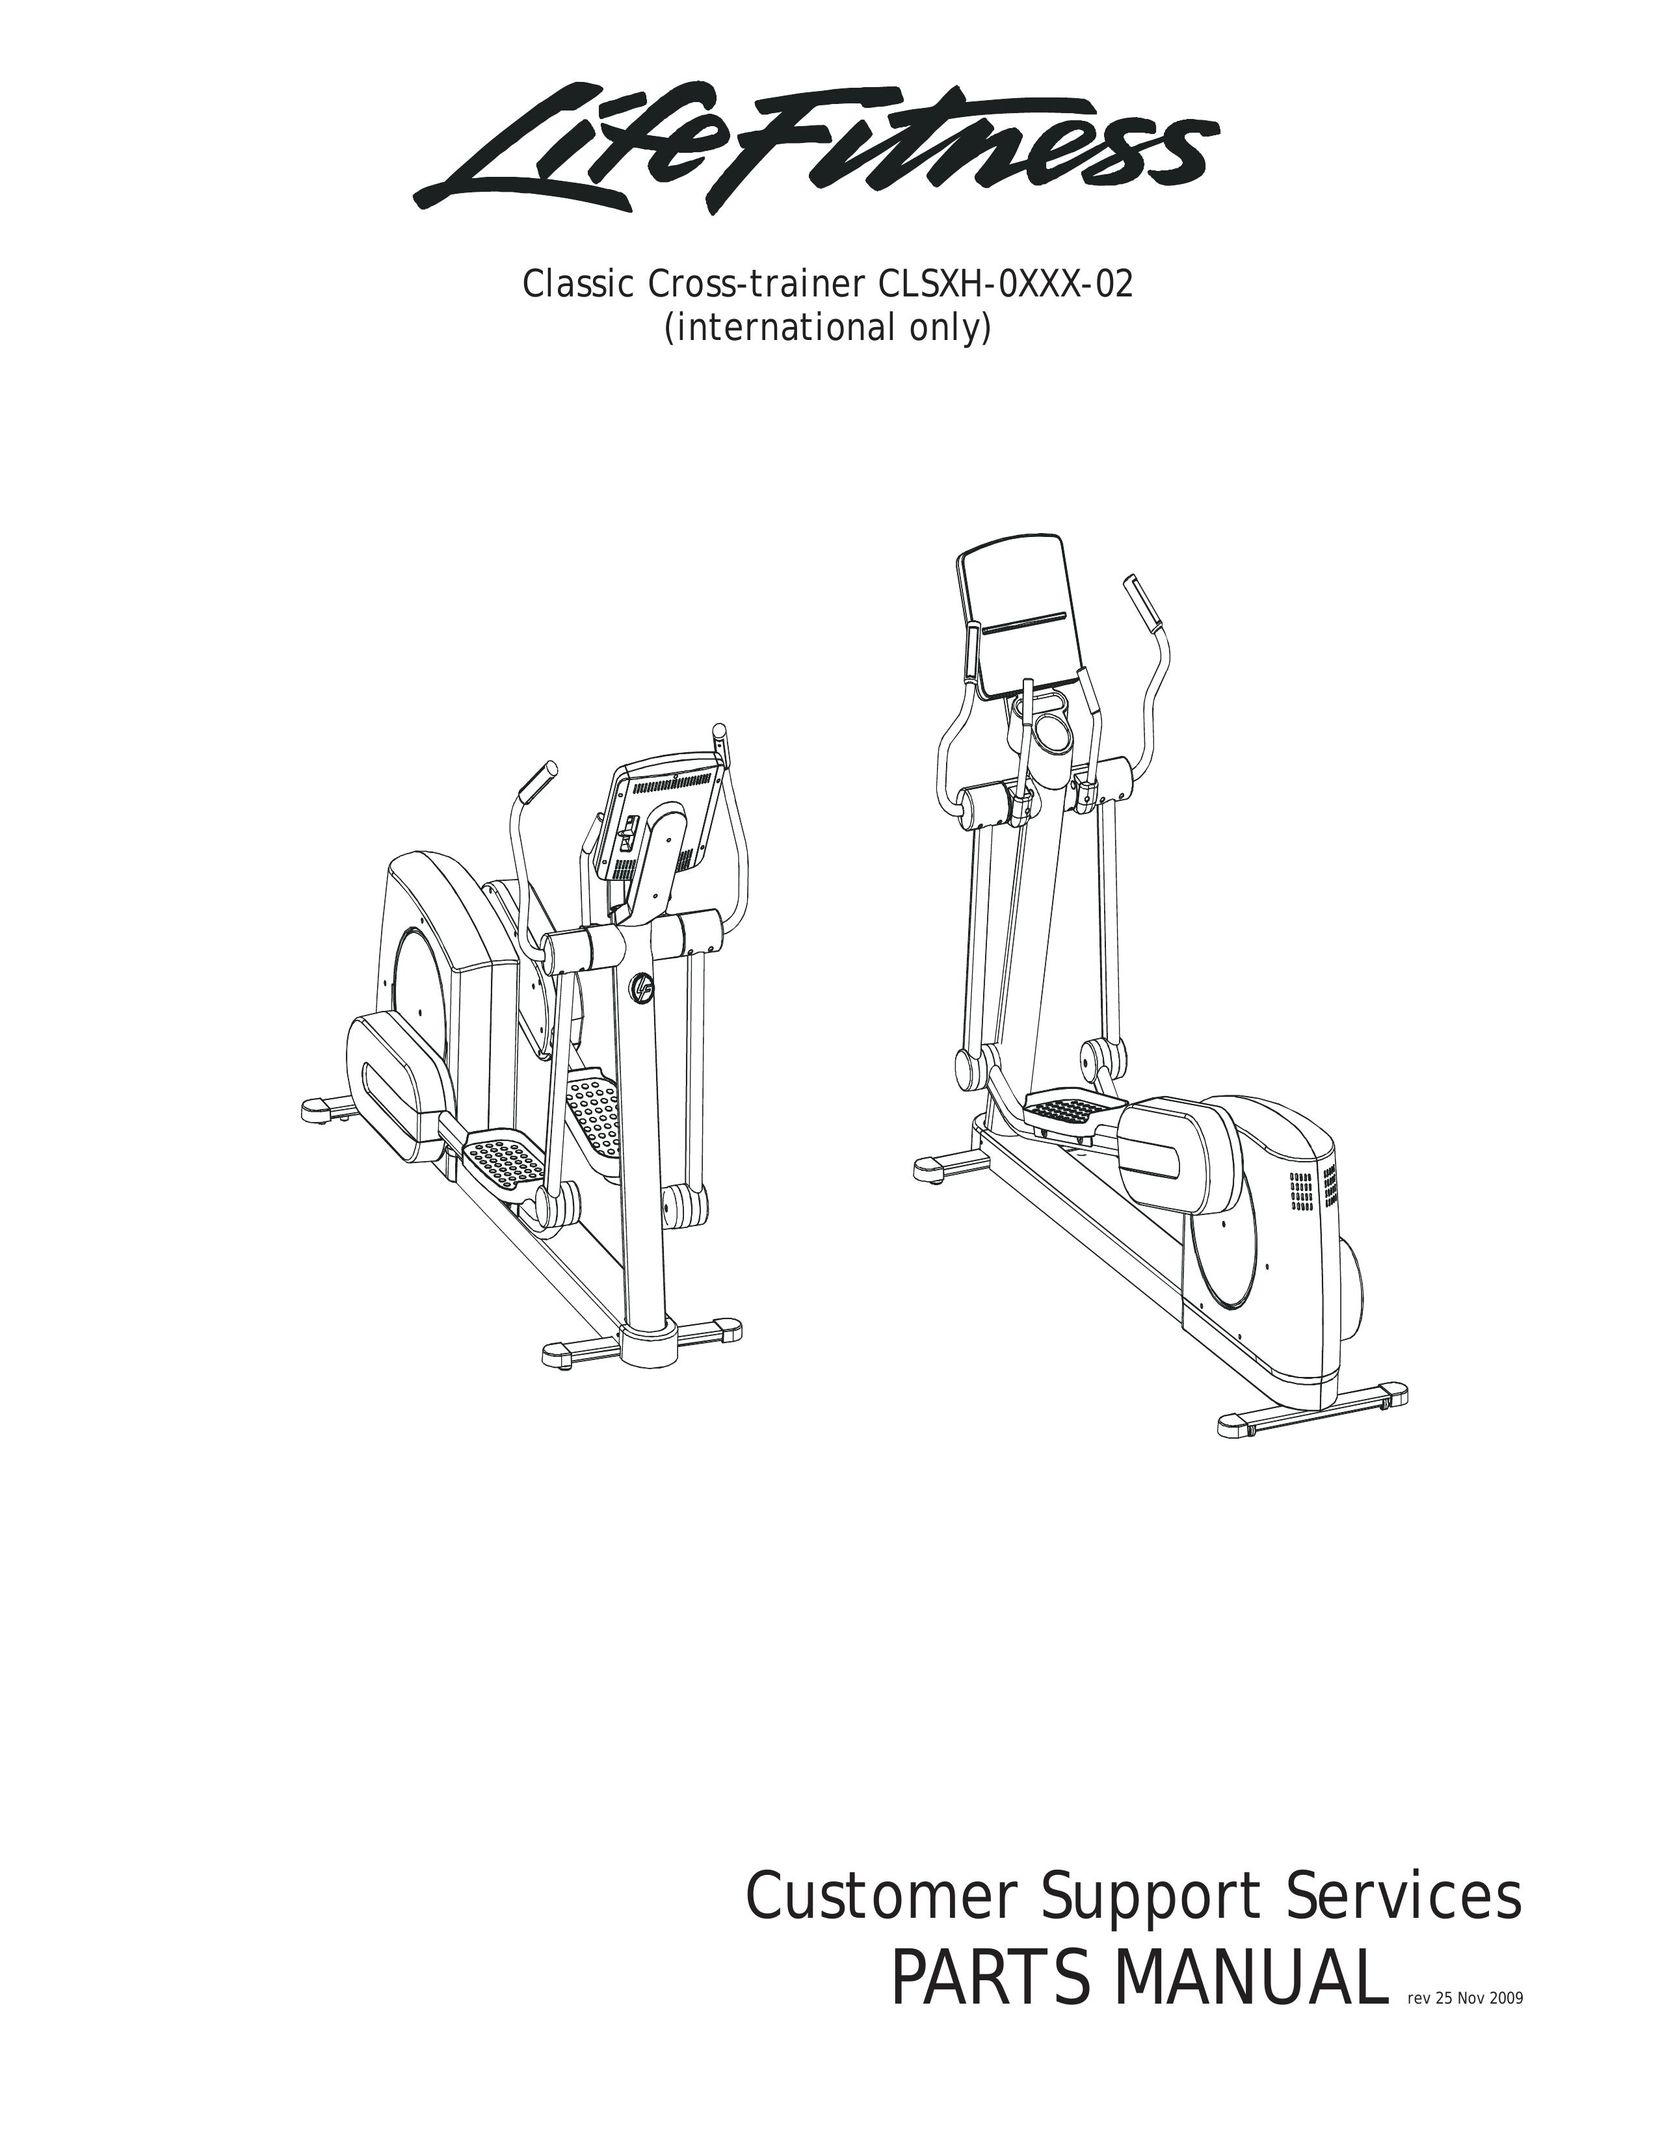 Life Fitness clsxh-oxxx-02 Stepper Machine User Manual